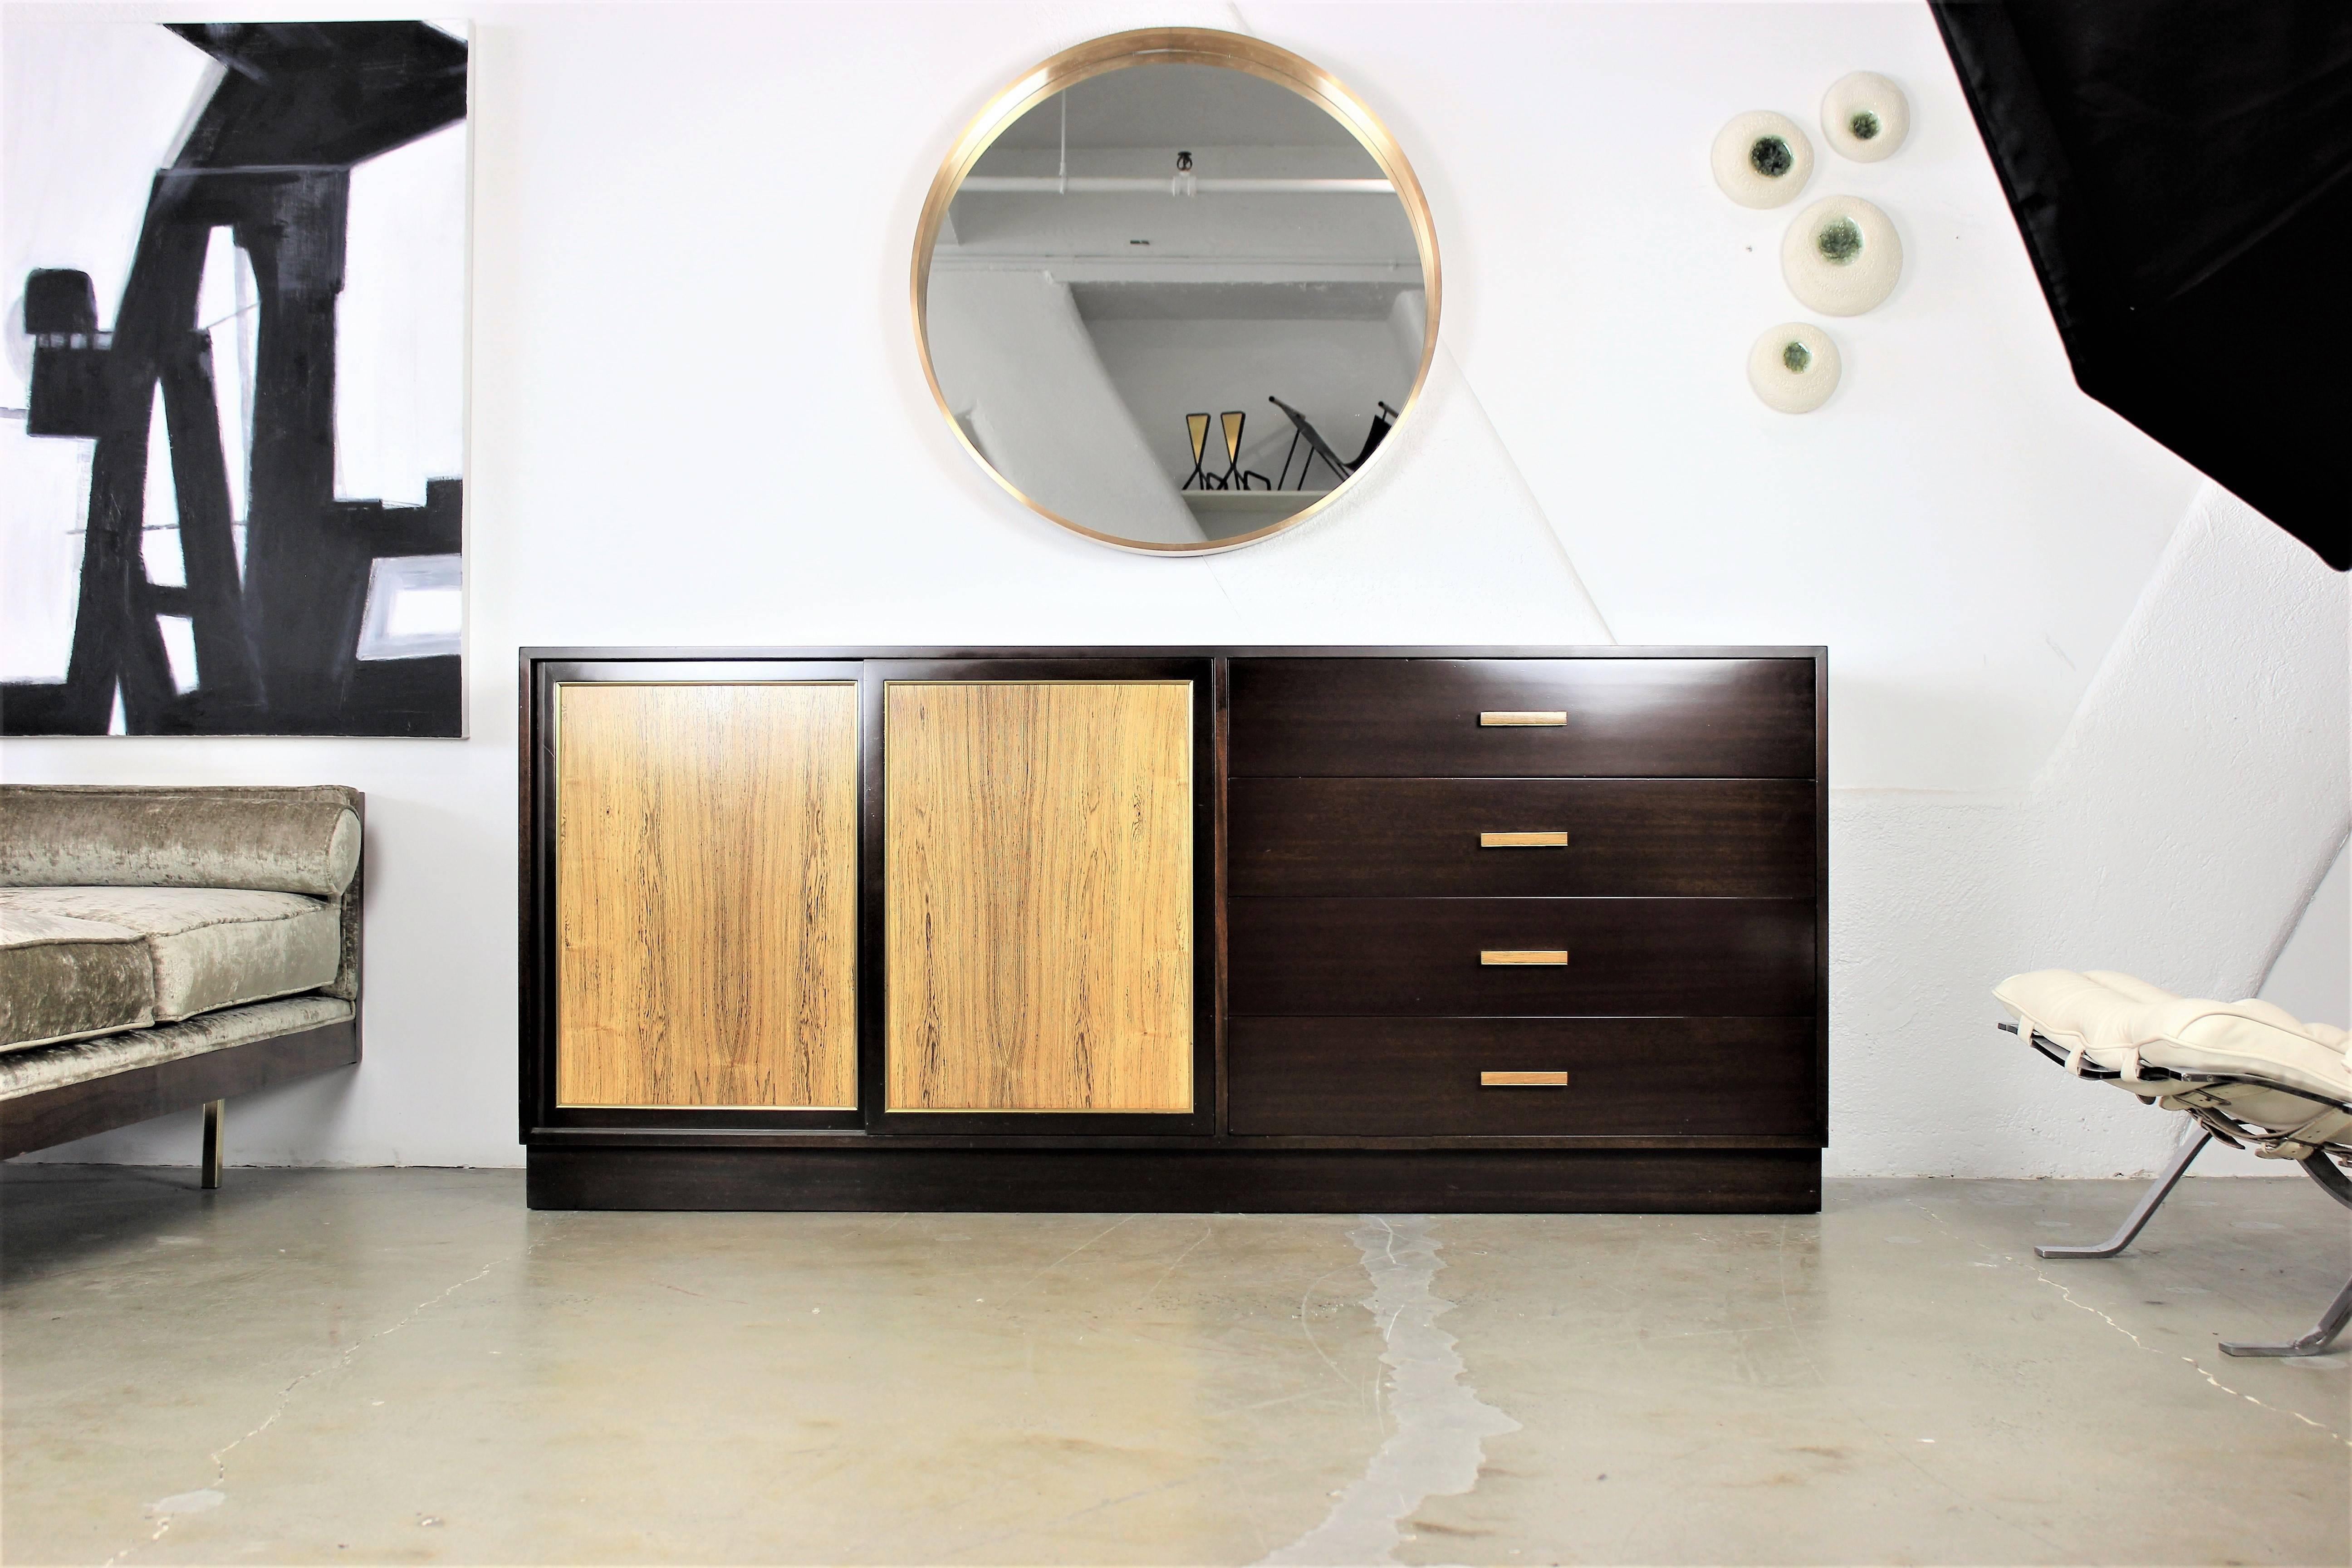 Large dresser by Harvey Probber in dark mahogany with rosewood sliding doors, 1960s. Drawer pulls are rosewood with brass detail. Classic design and tons of storage. 

Whether furnishing a contemporary Soho loft or stylish post-war Park Avenue